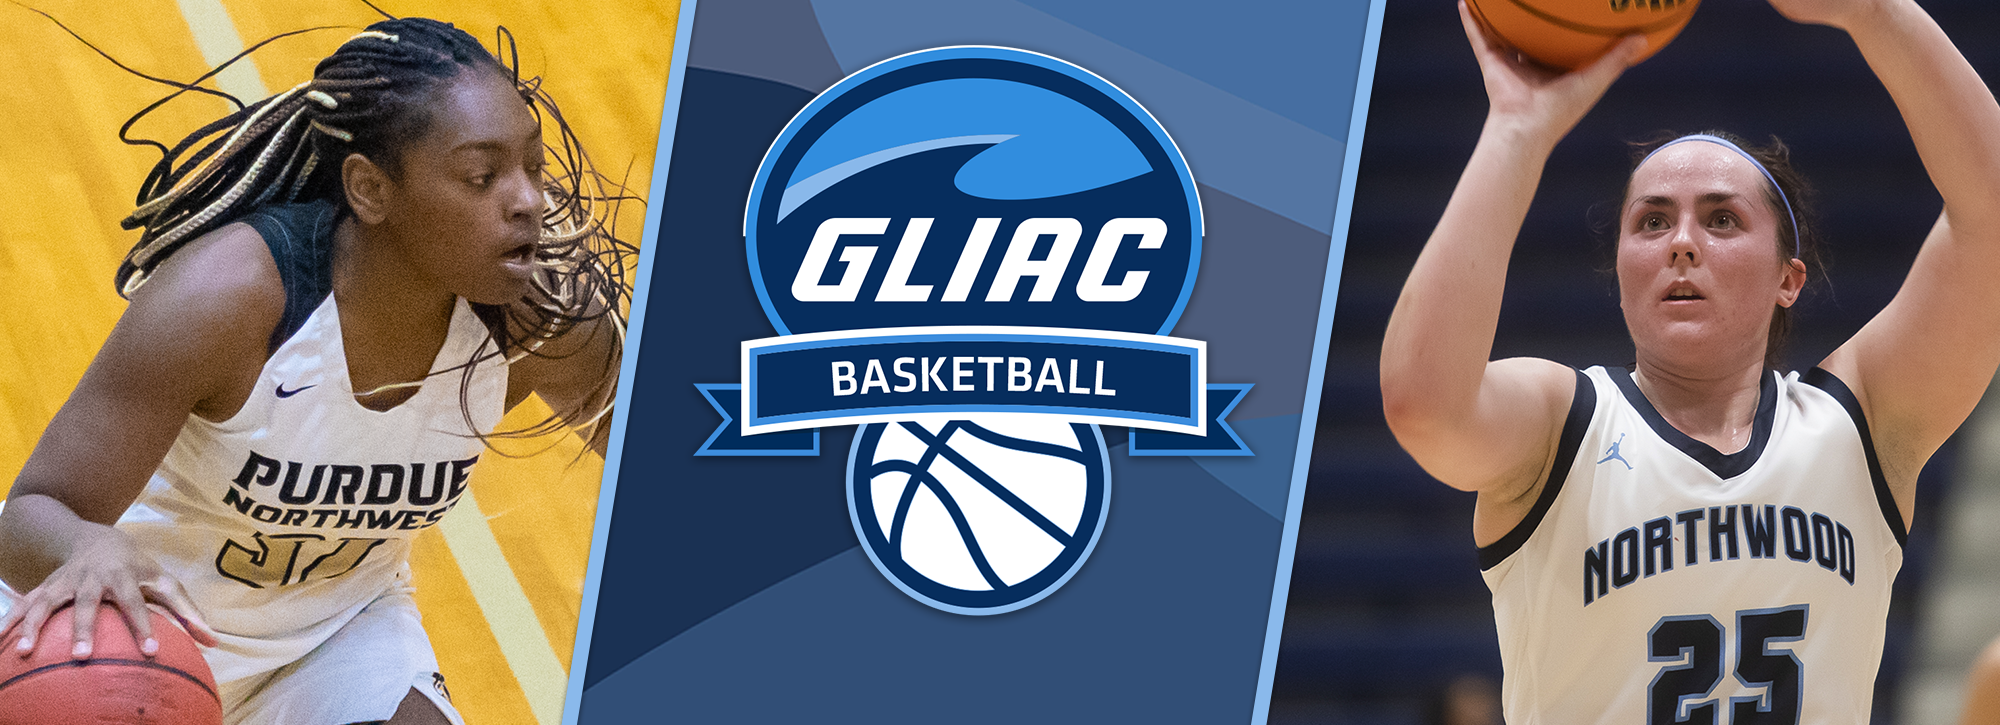 PNW's Shaw and NU's Voelker receive GLIAC Women's Basketball Player of the Week recognition